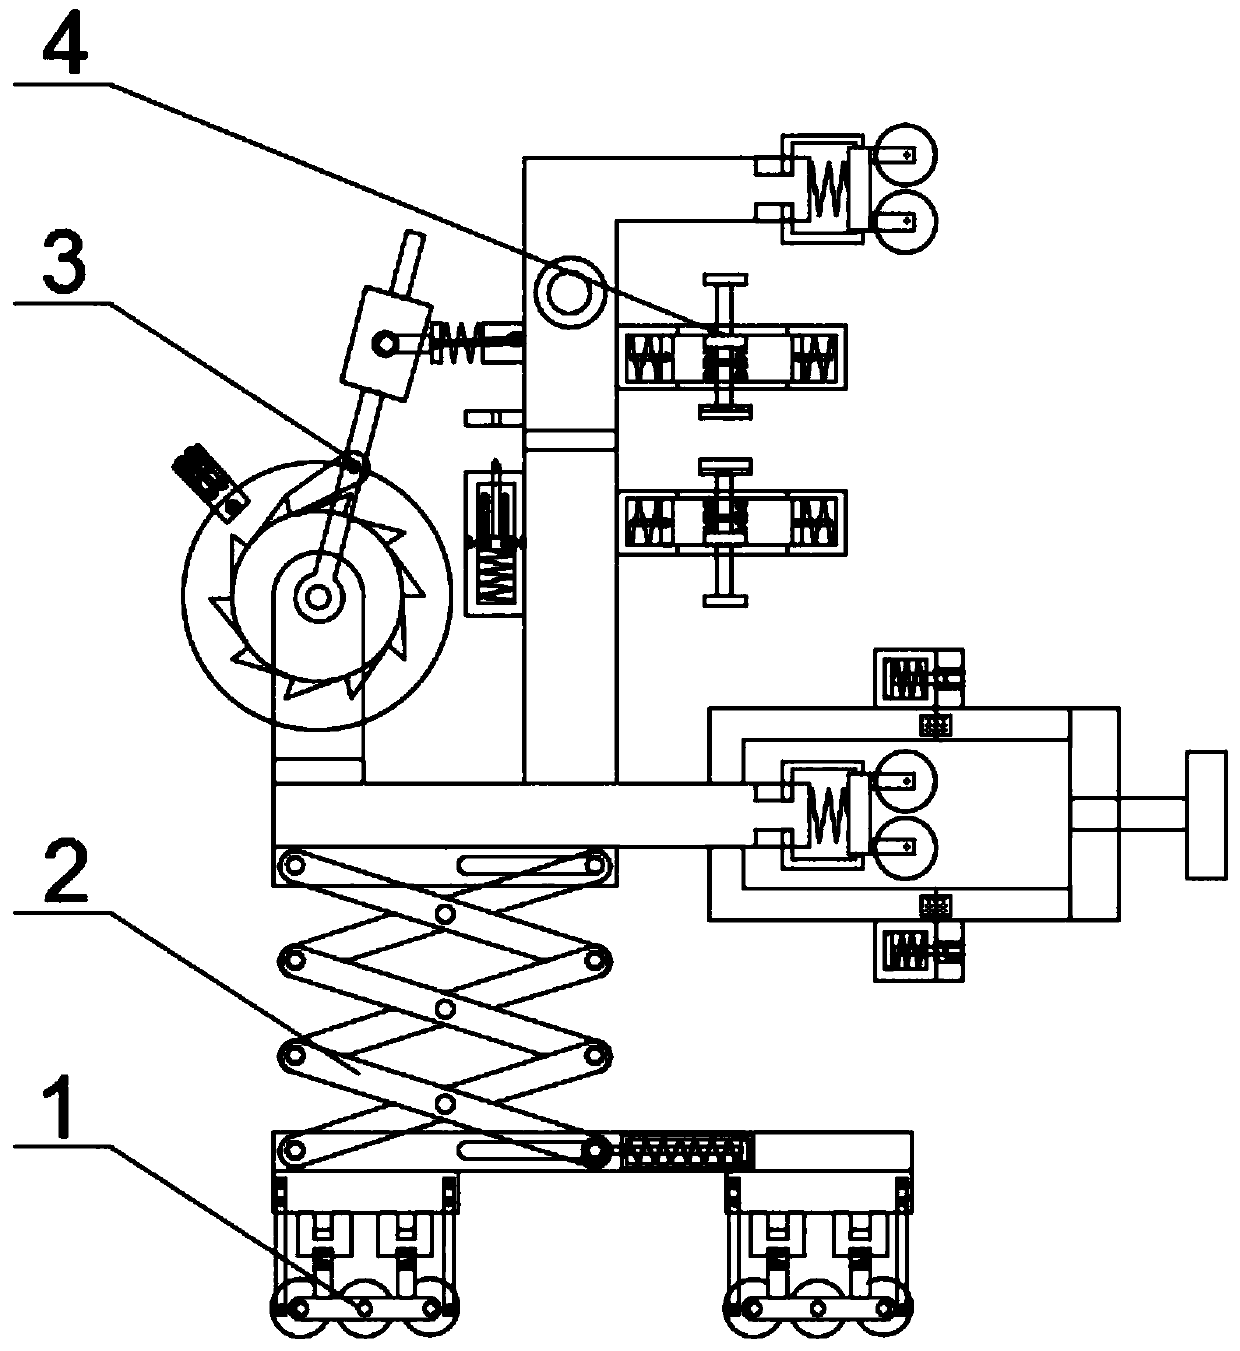 An auxiliary device for wiring in a power system